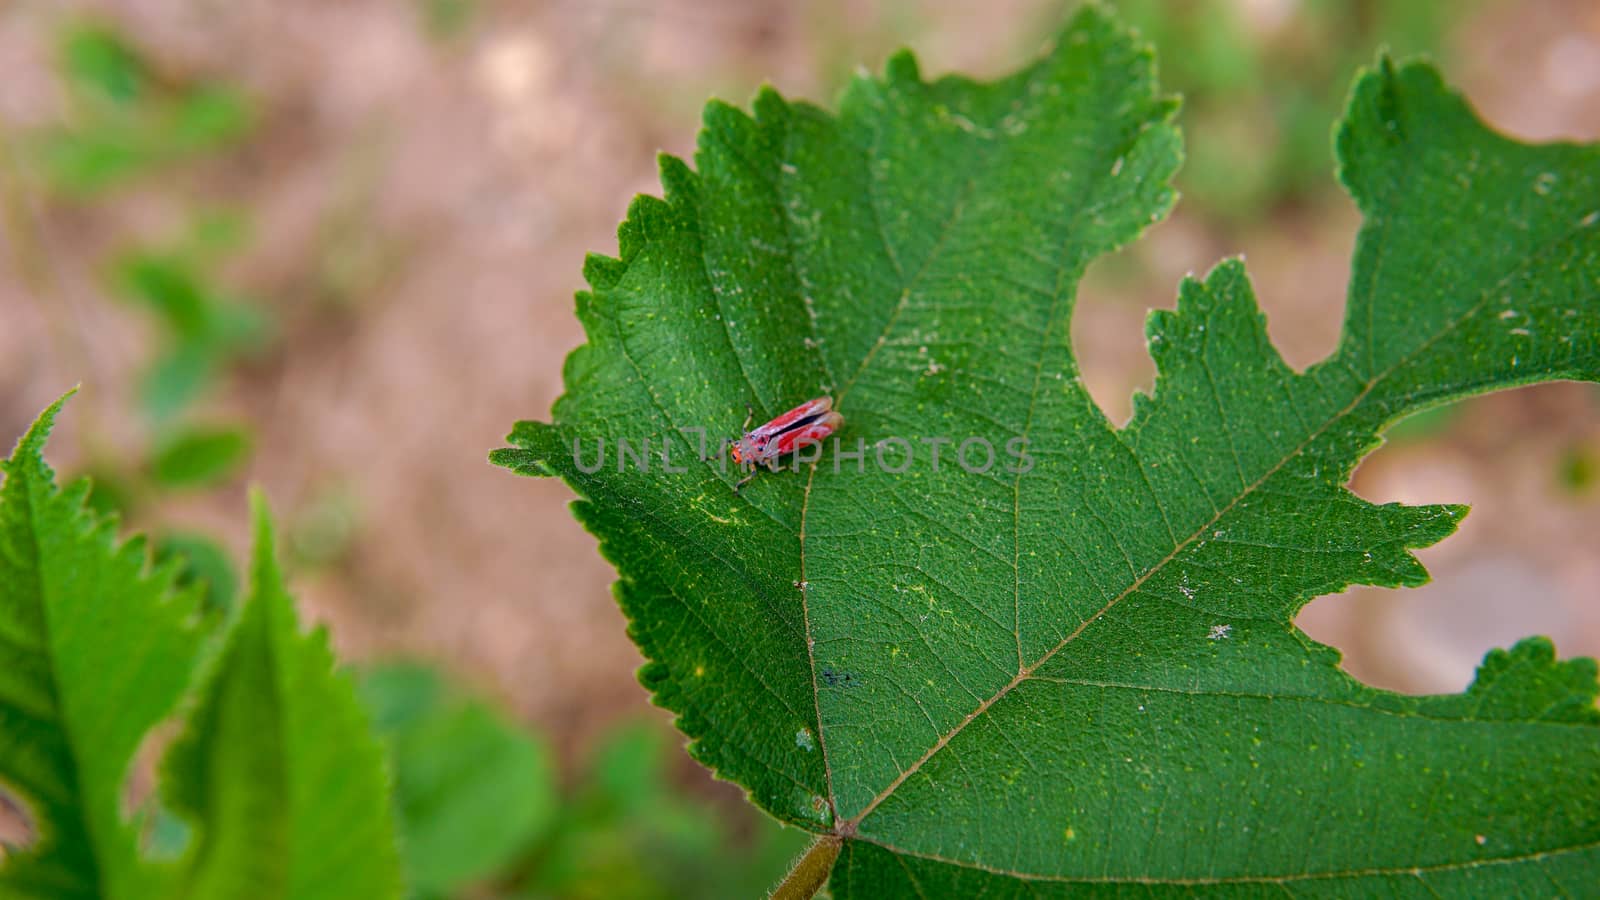 Red insect on a green leaf in the garden by sonandonures